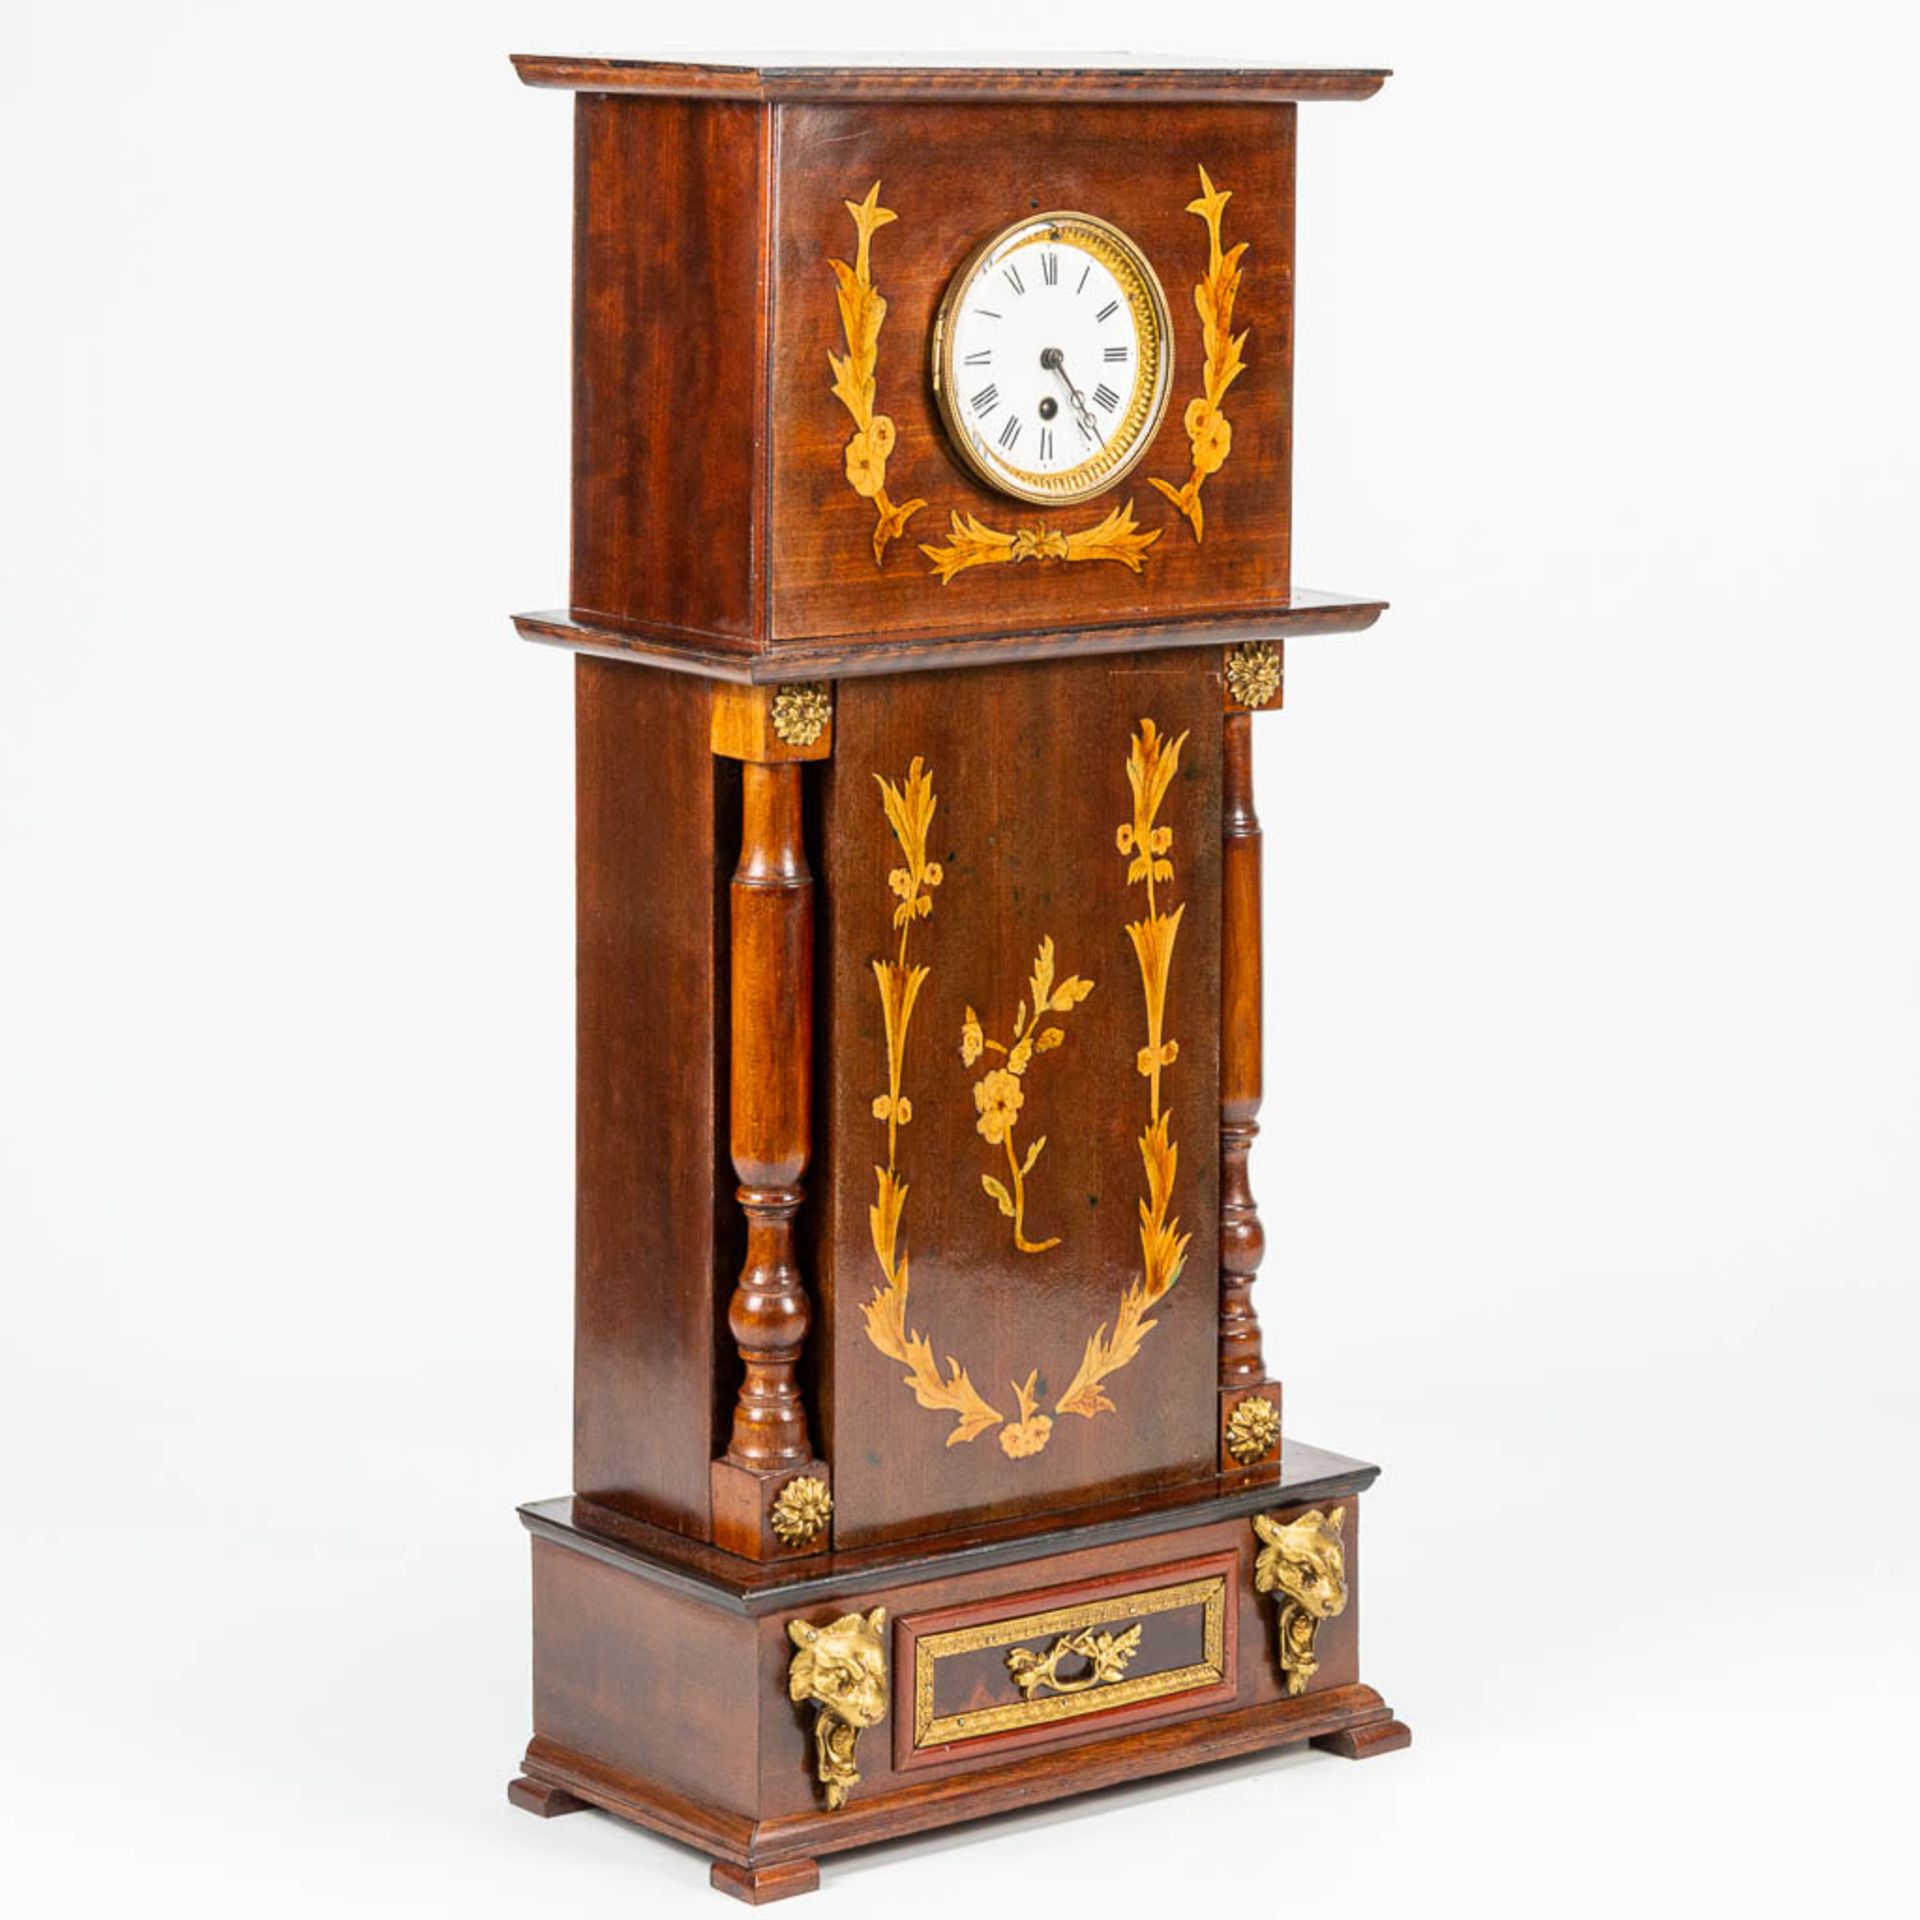 A table clock made of marquetry inlay, 19th century clock in a 20th century case. (17,5 x 34 x 73 cm